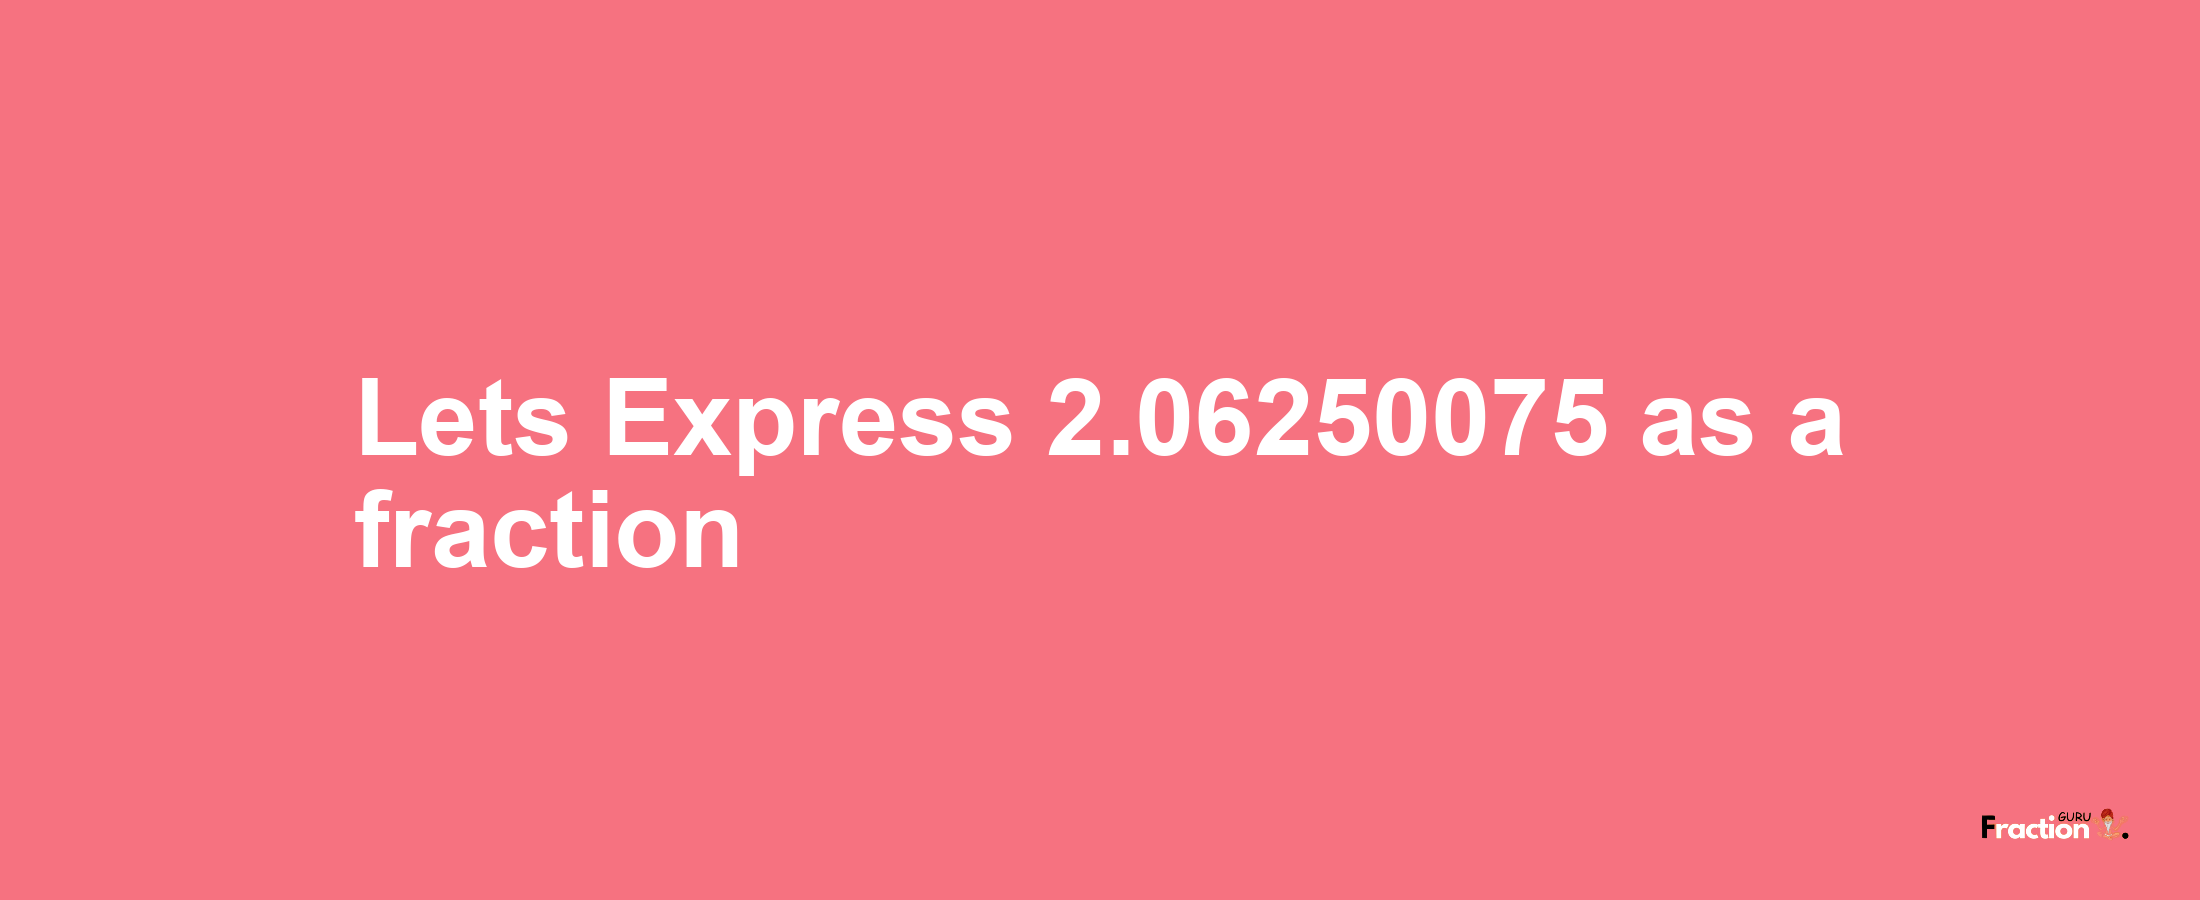 Lets Express 2.06250075 as afraction